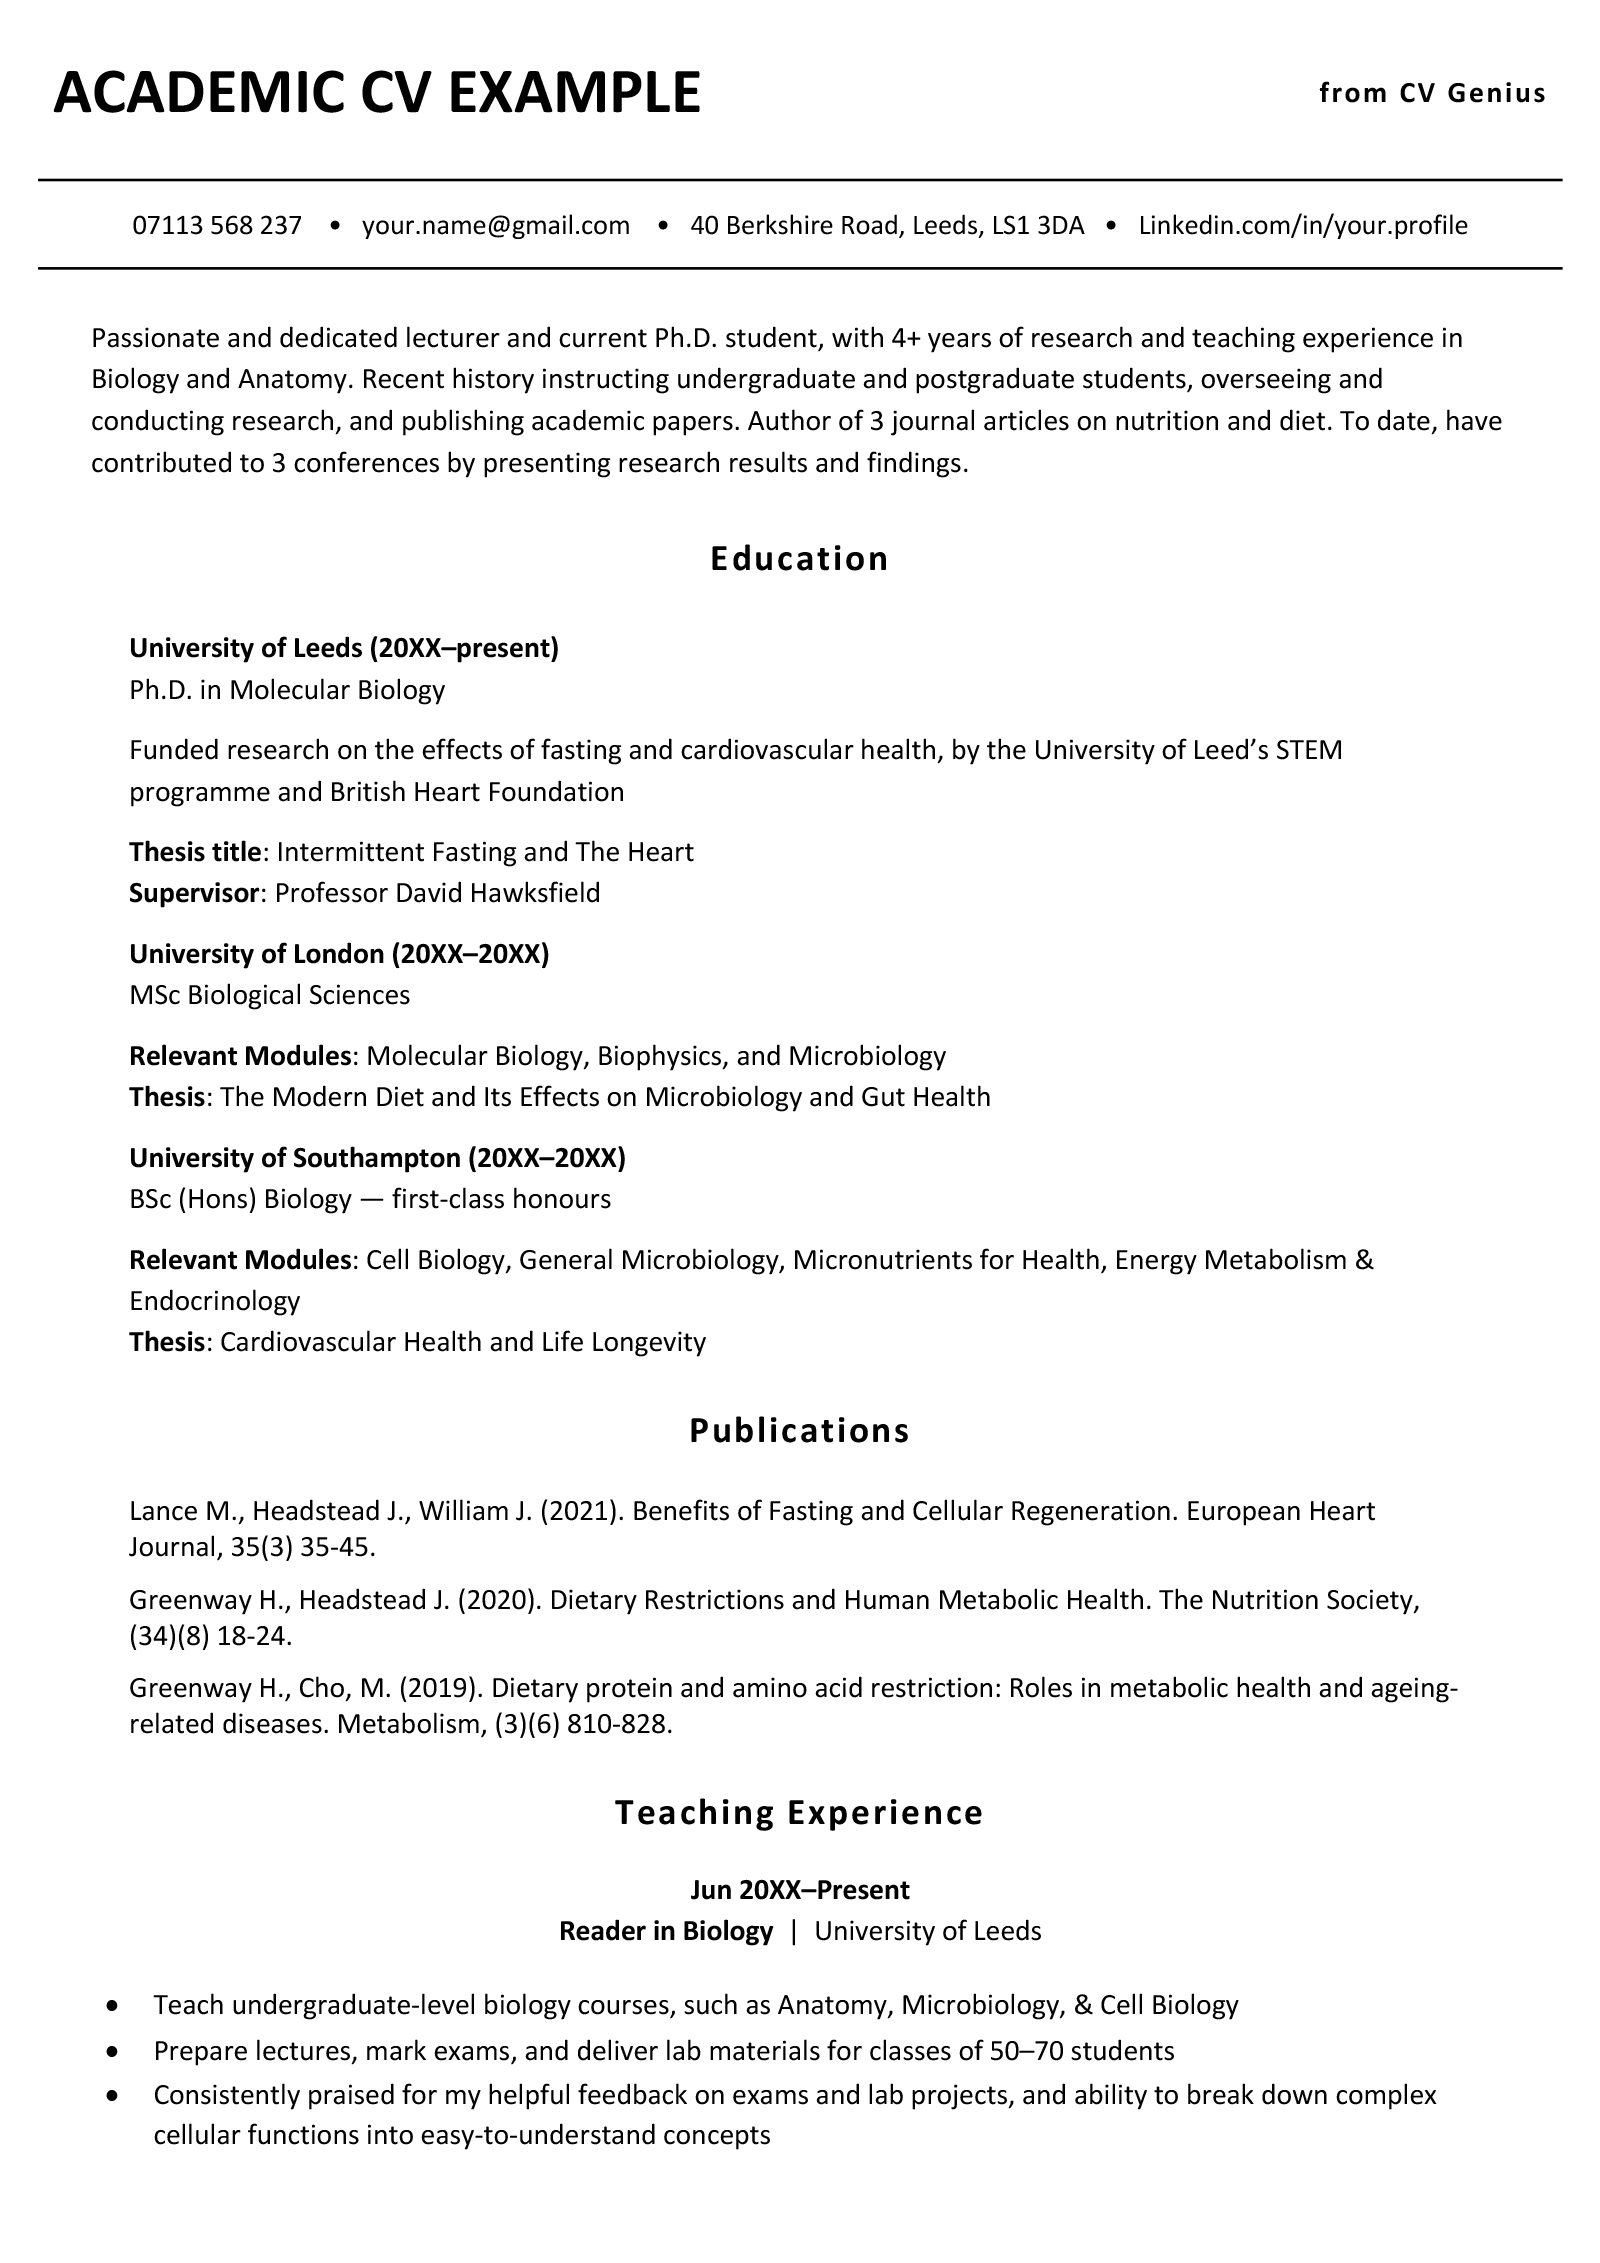 A professional-looking academic CV example with a summary of the candidate's experience, as well as their education and recent publications.